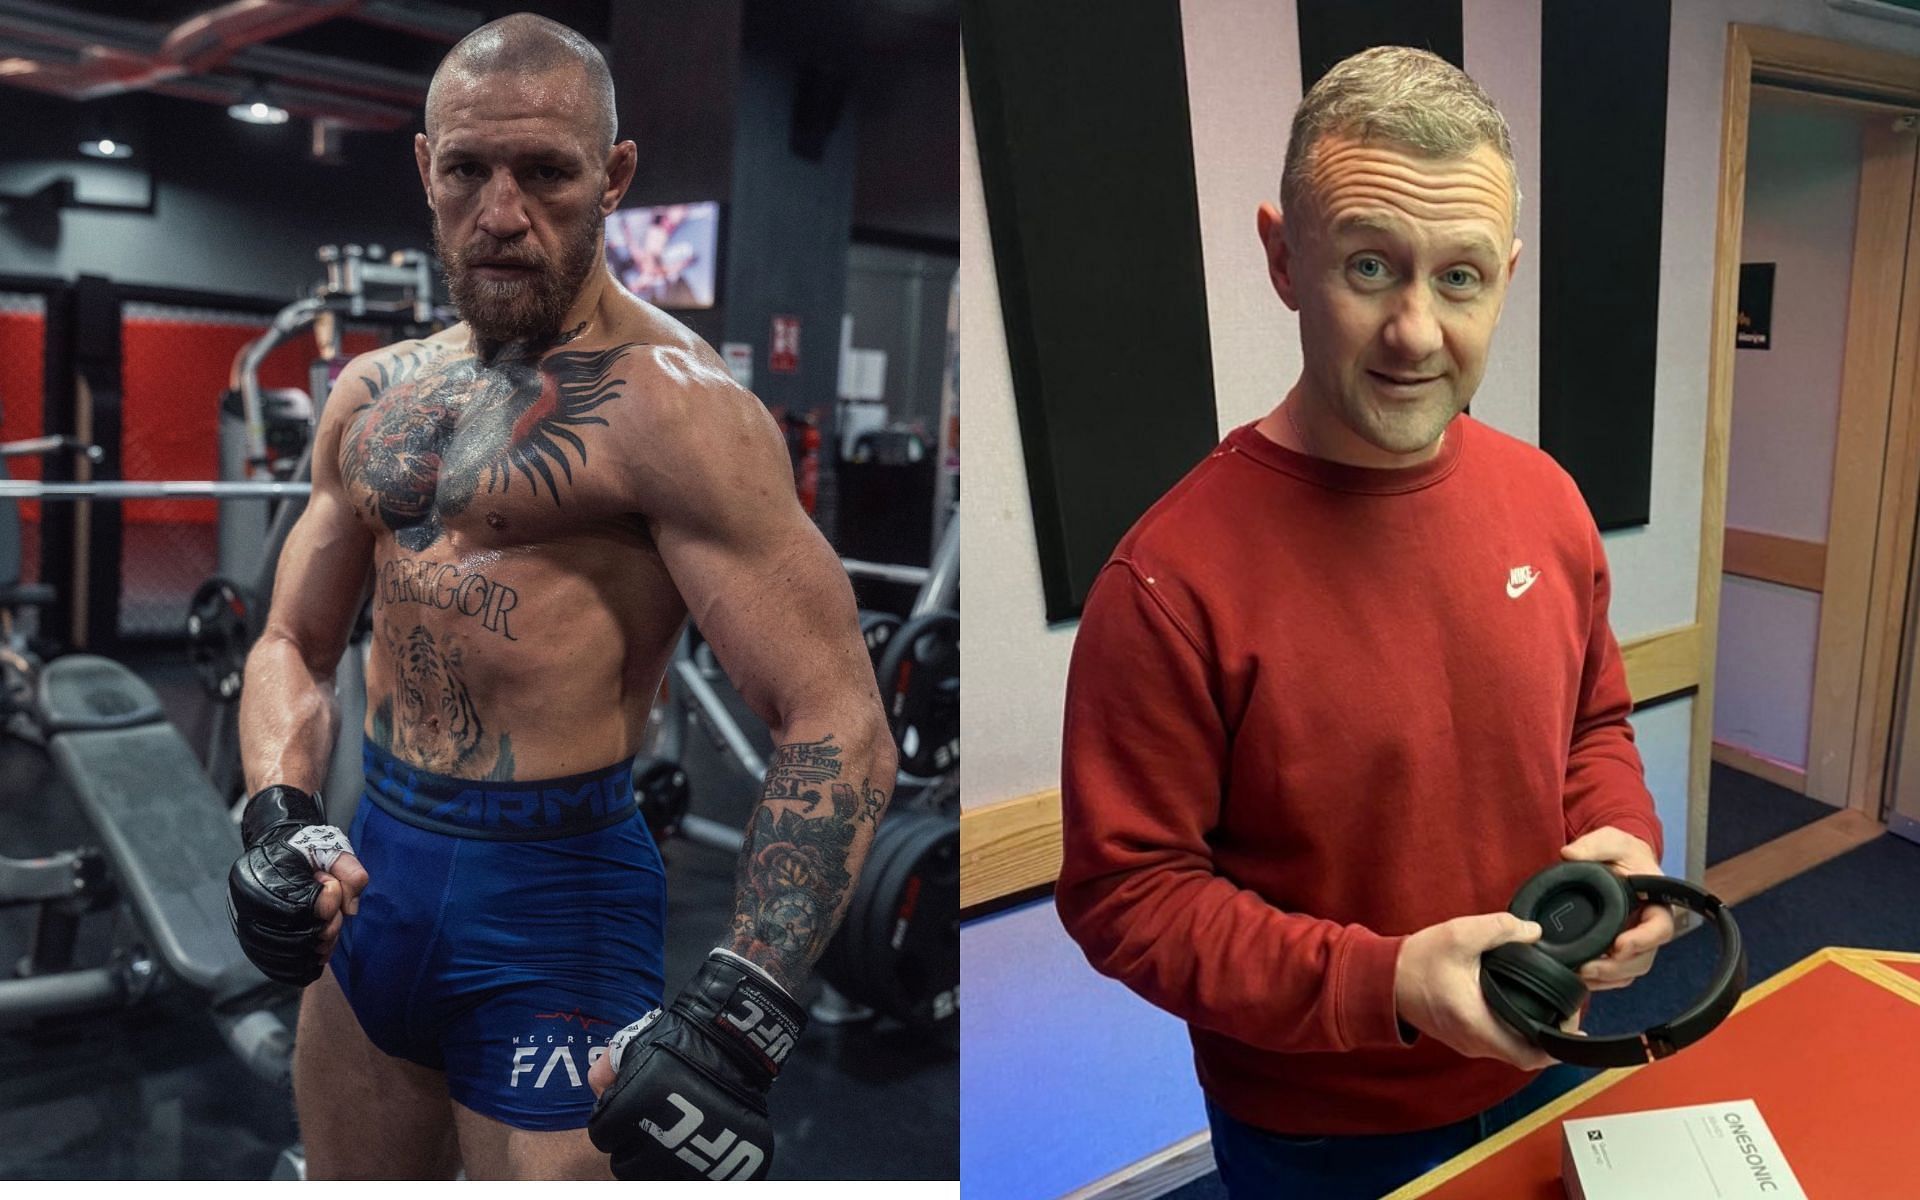 Conor McGregor [Left] PJ Gallagher [Right] [Images courtesy: @TheNotoriousMMA and @pjgallagher Twitter]